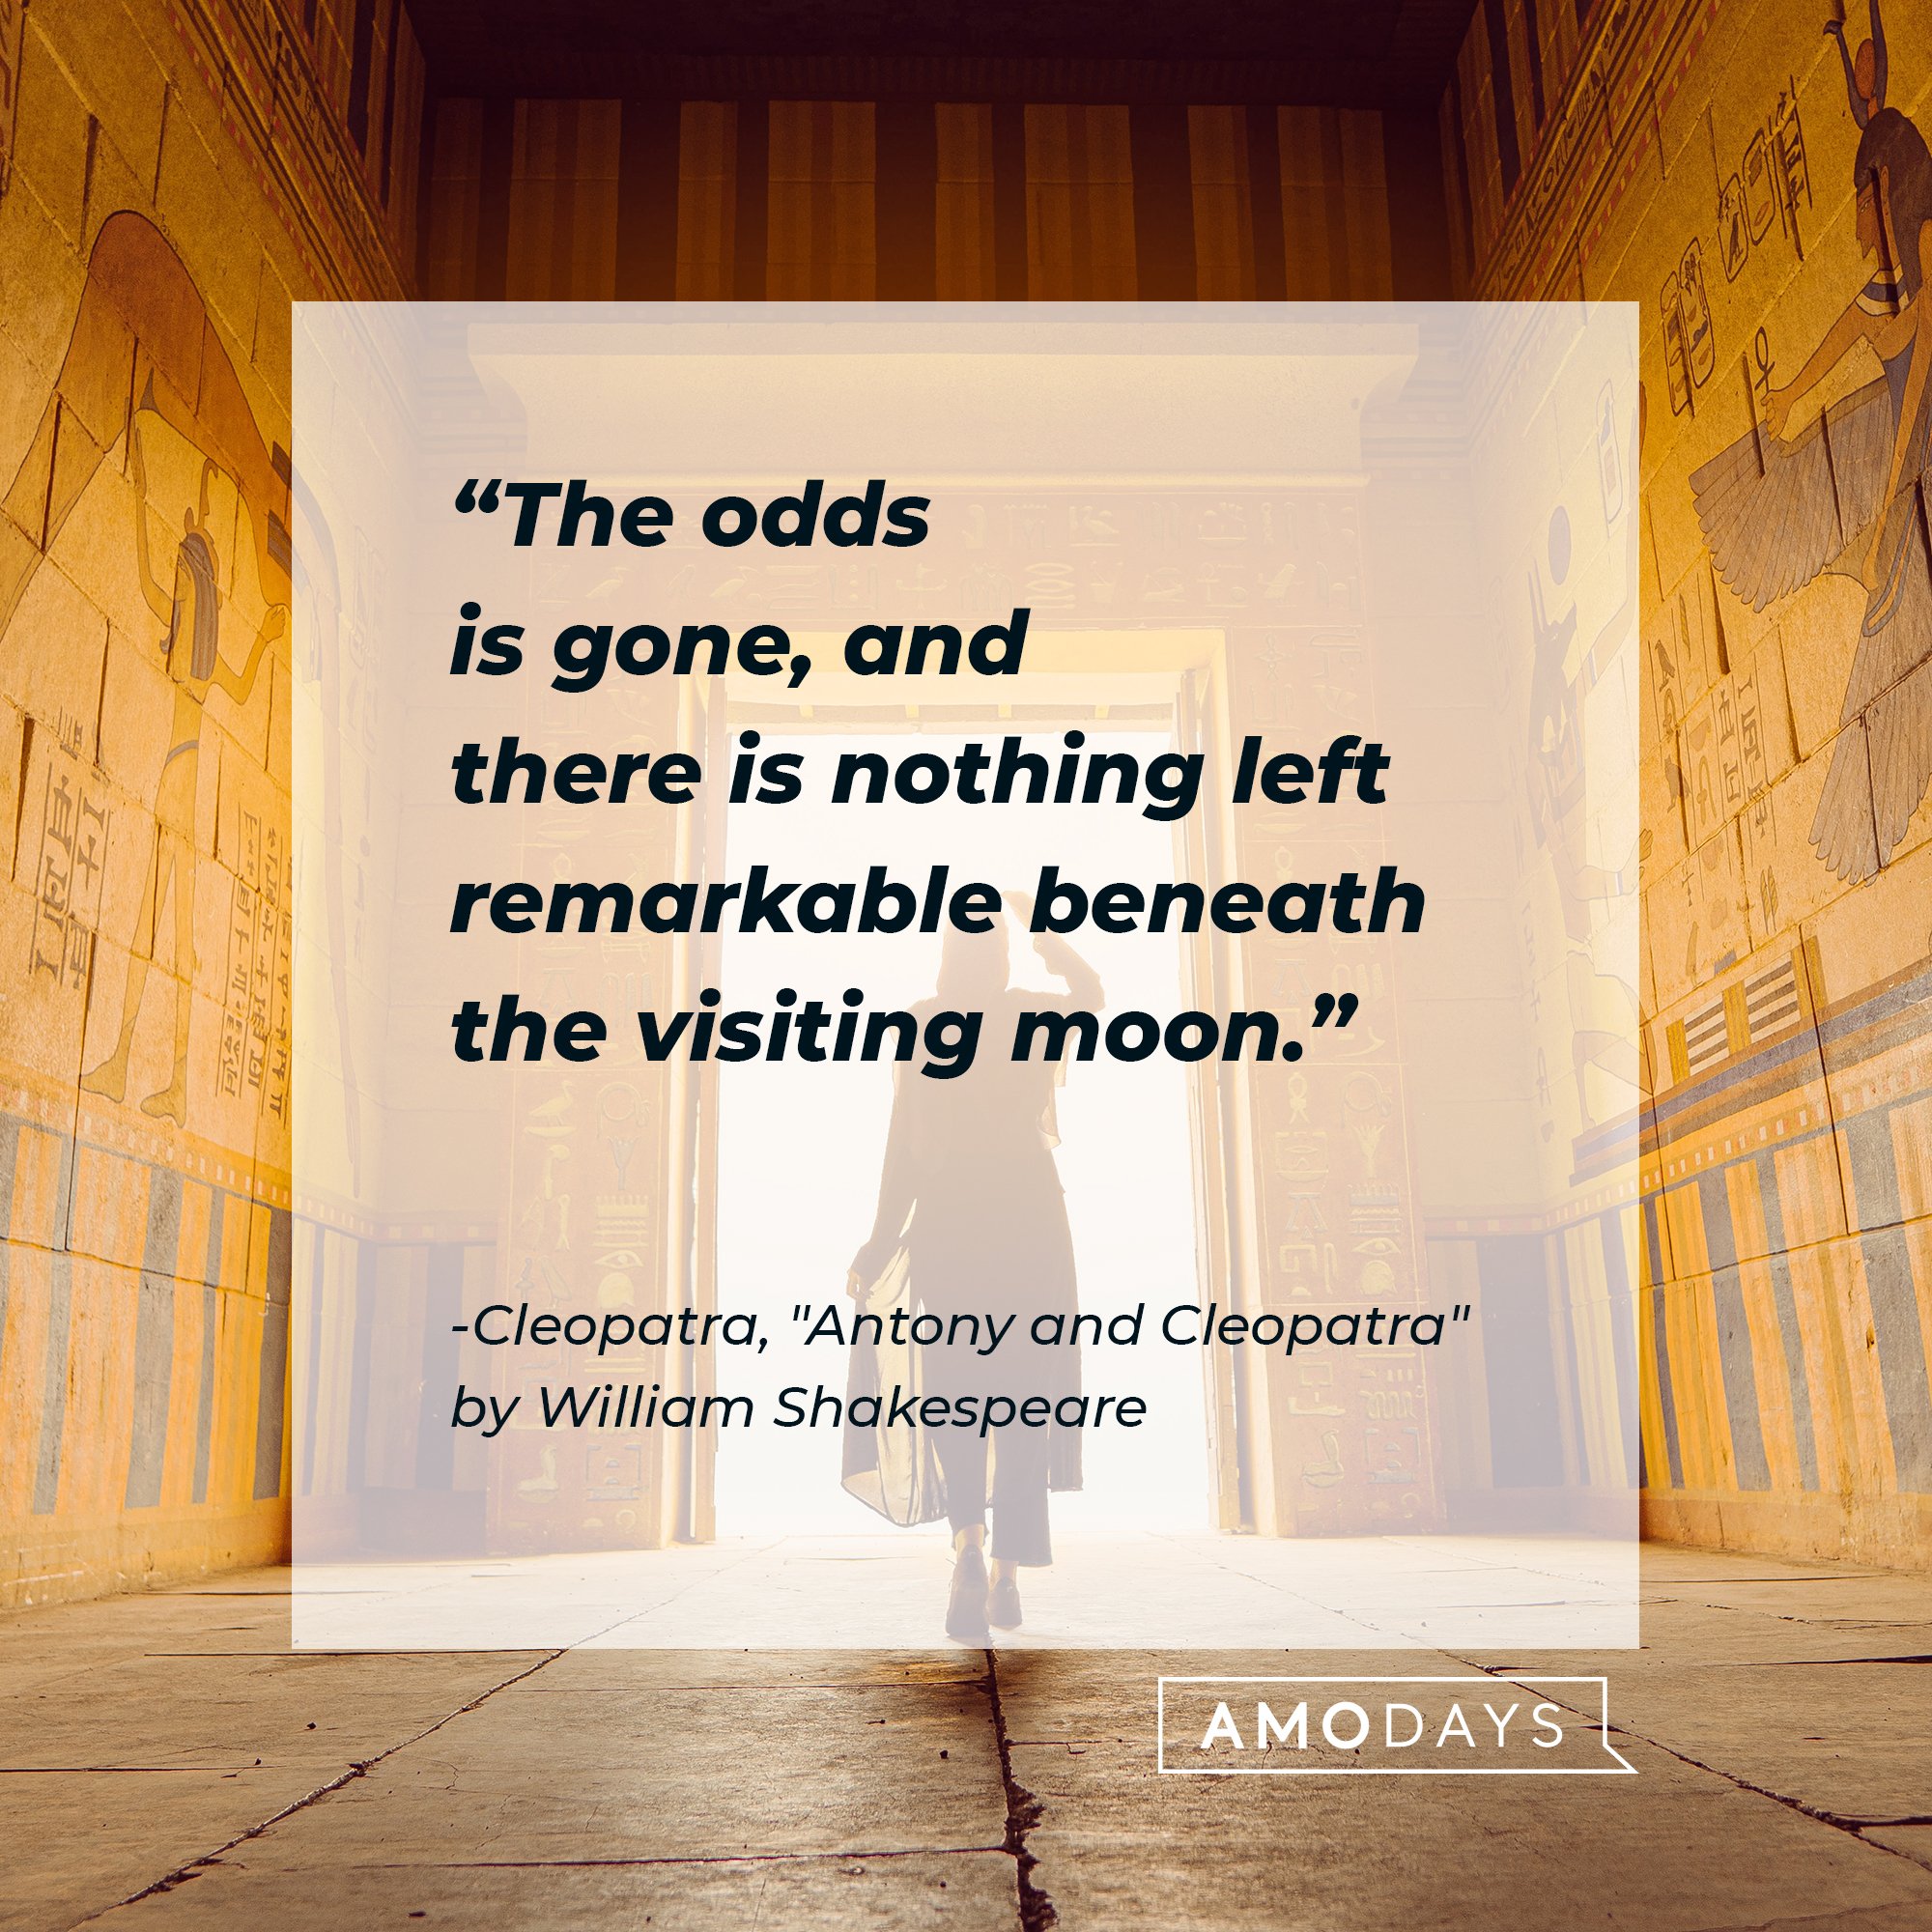  Cleopatra’s quote from "Antony and Cleopatra" by William Shakespeare: "The odds is gone, and there is nothing left remarkable beneath the visiting moon." | Image: AmoDays